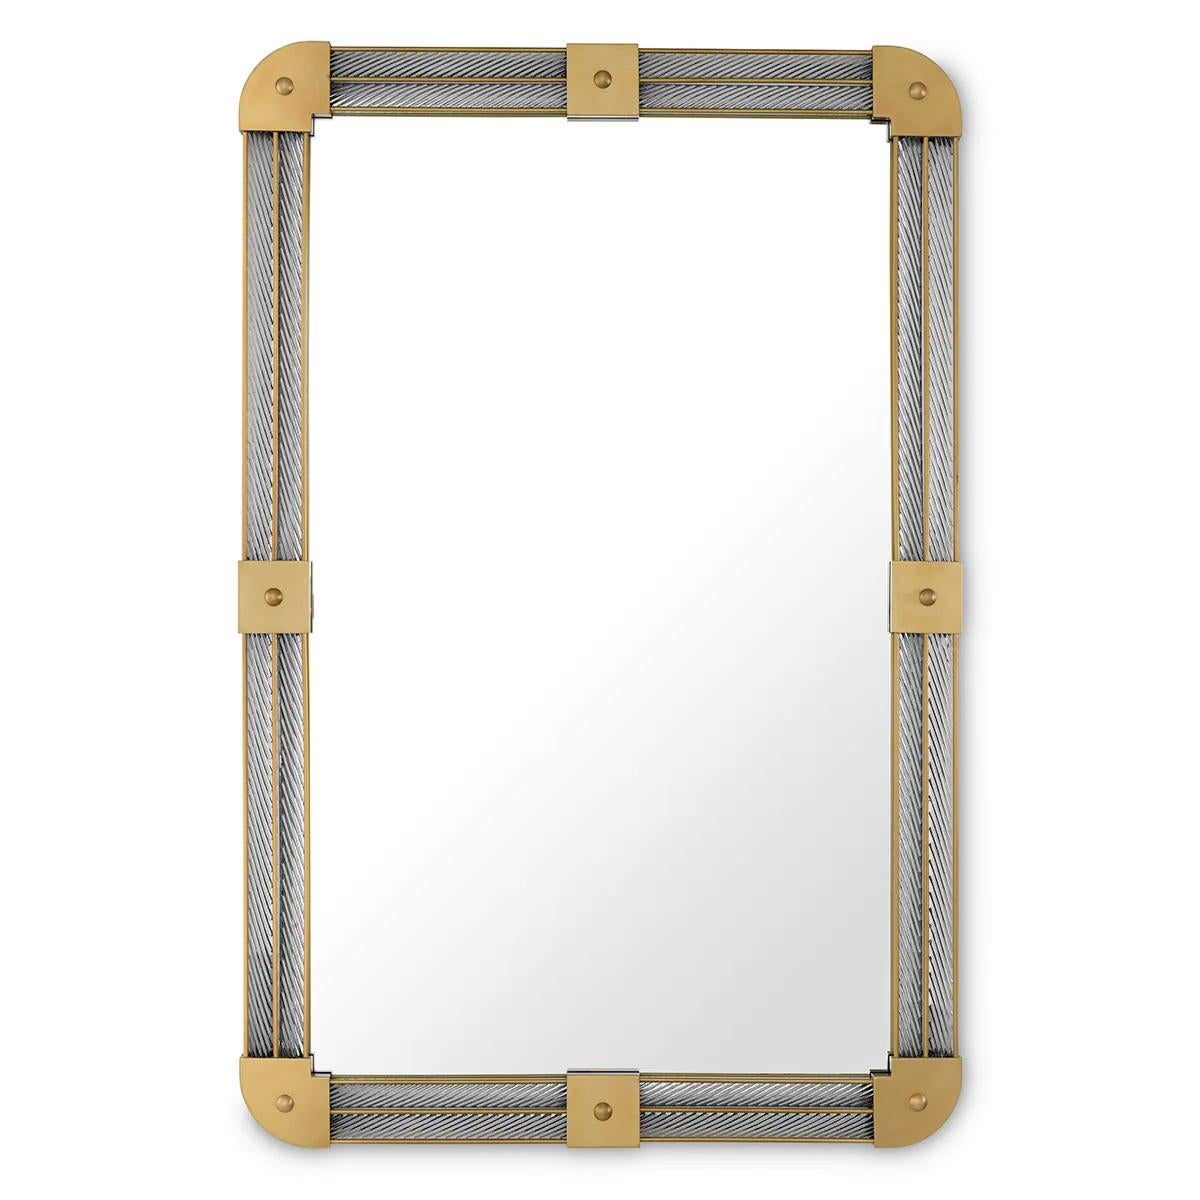 Mirror Gamay Brass with structure in solid brass in
vintage finish, with torsade glass rods insade the 
brass frame. With clear glass mirror.